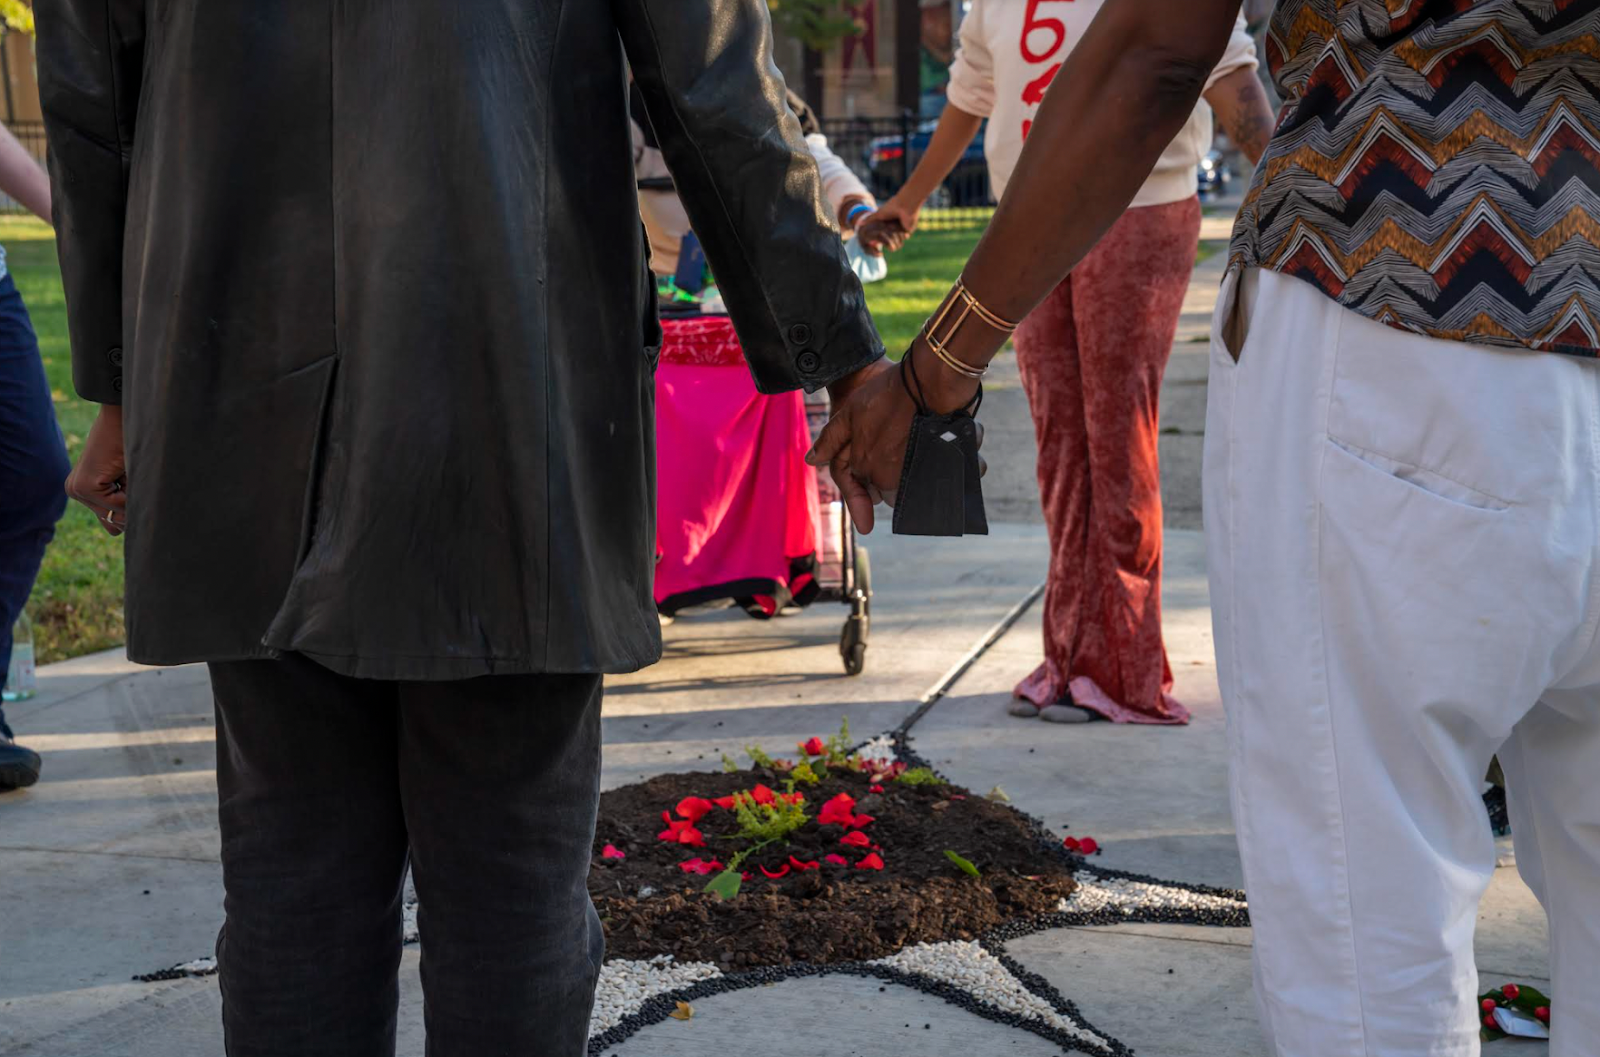 Image: A circle of people holding hands around a floral and dirt installation.